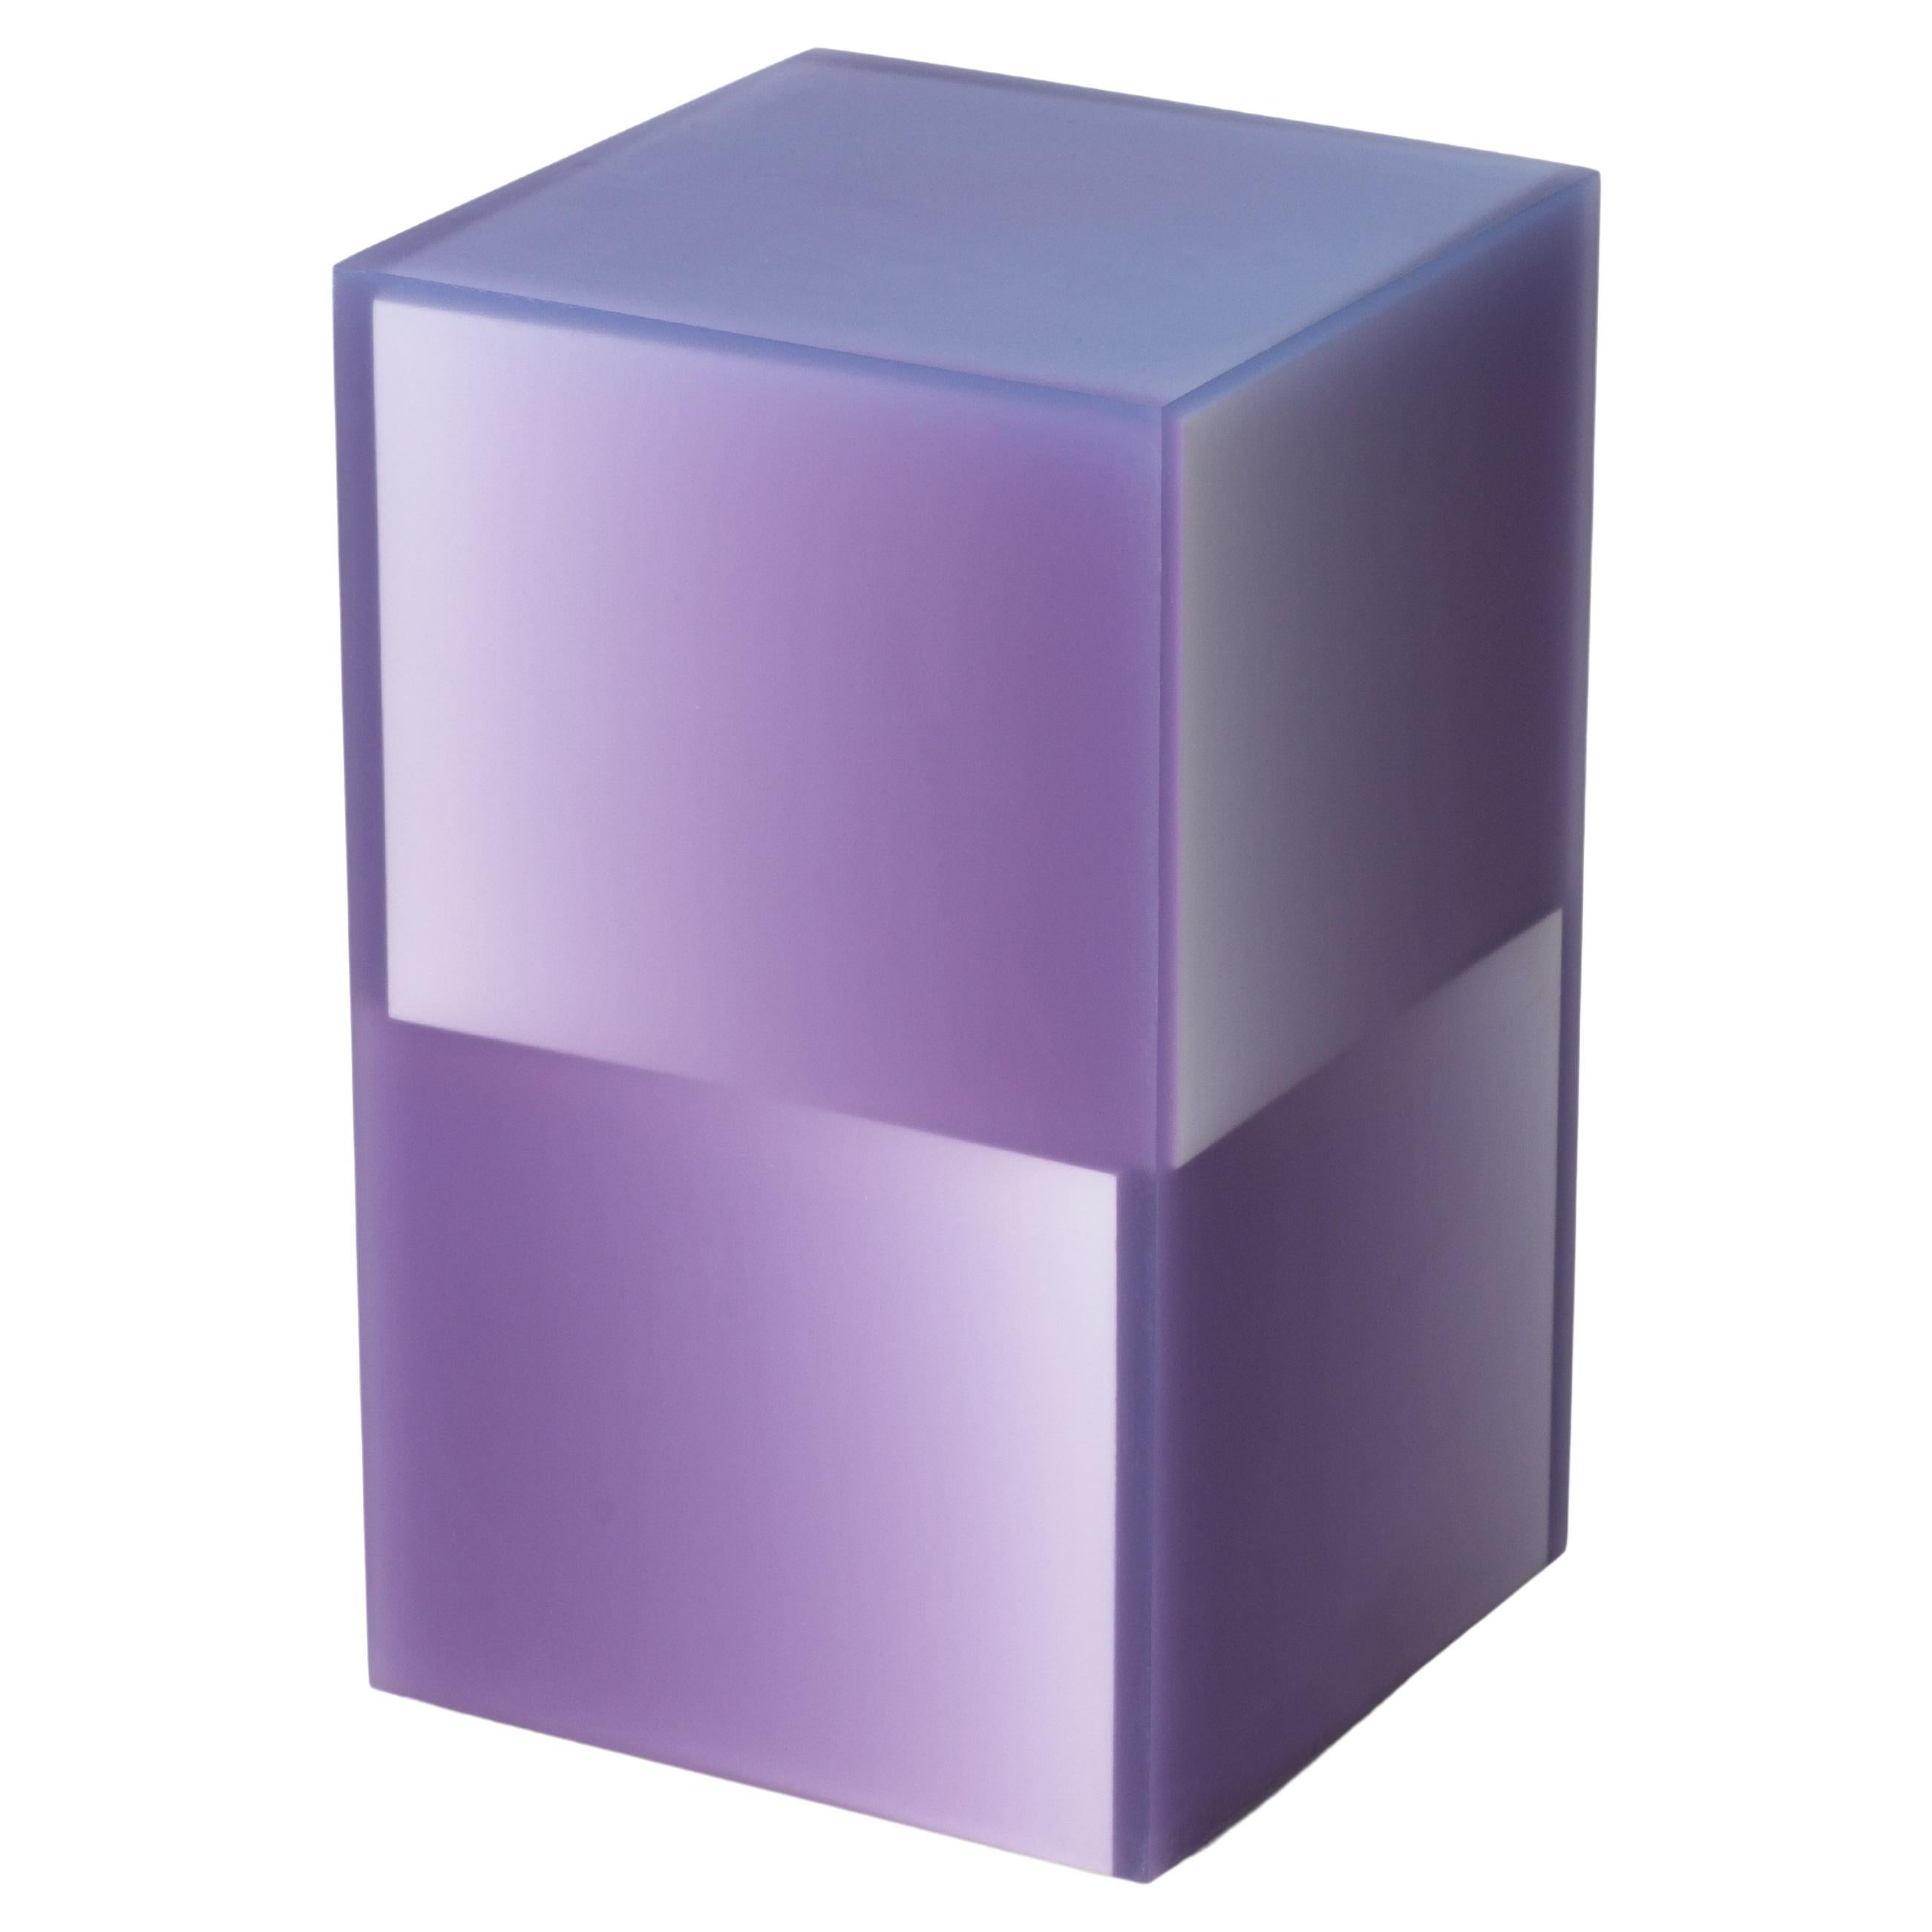 Two Way Shift Box Resin Side Table/Stool Purple by Facture REP Tuleste Factory For Sale